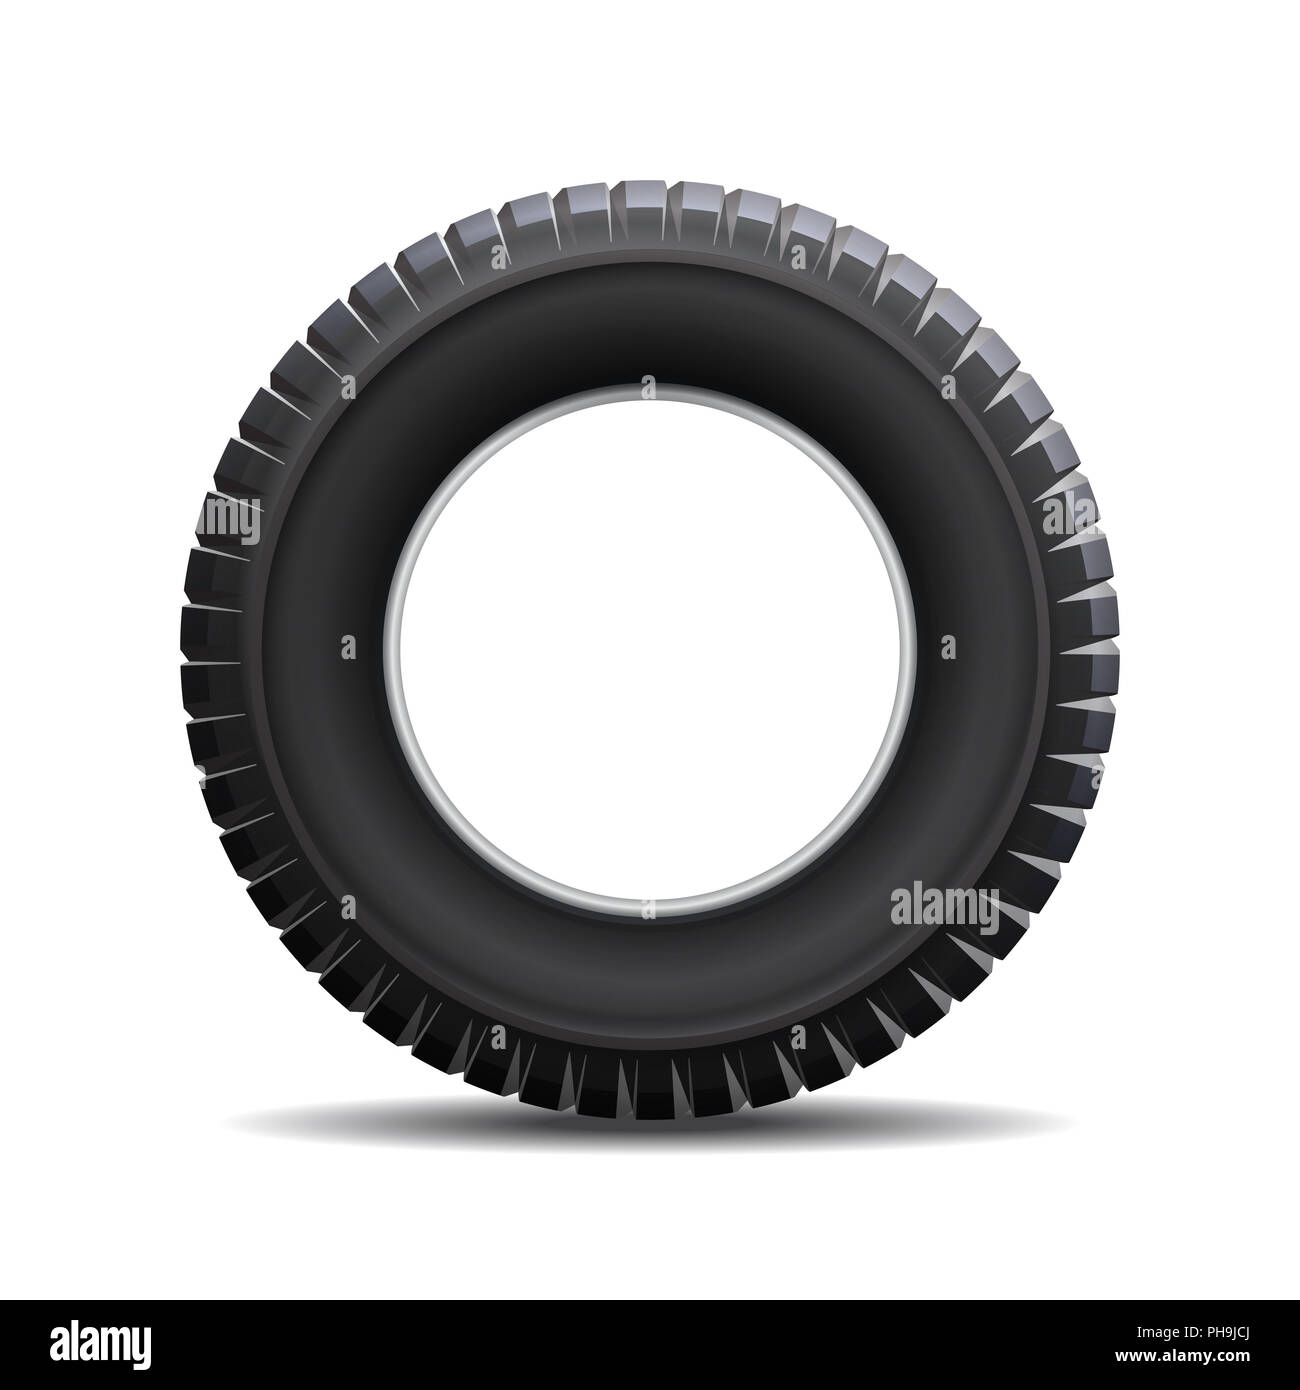 Car tire isolated on white background. Stock Photo